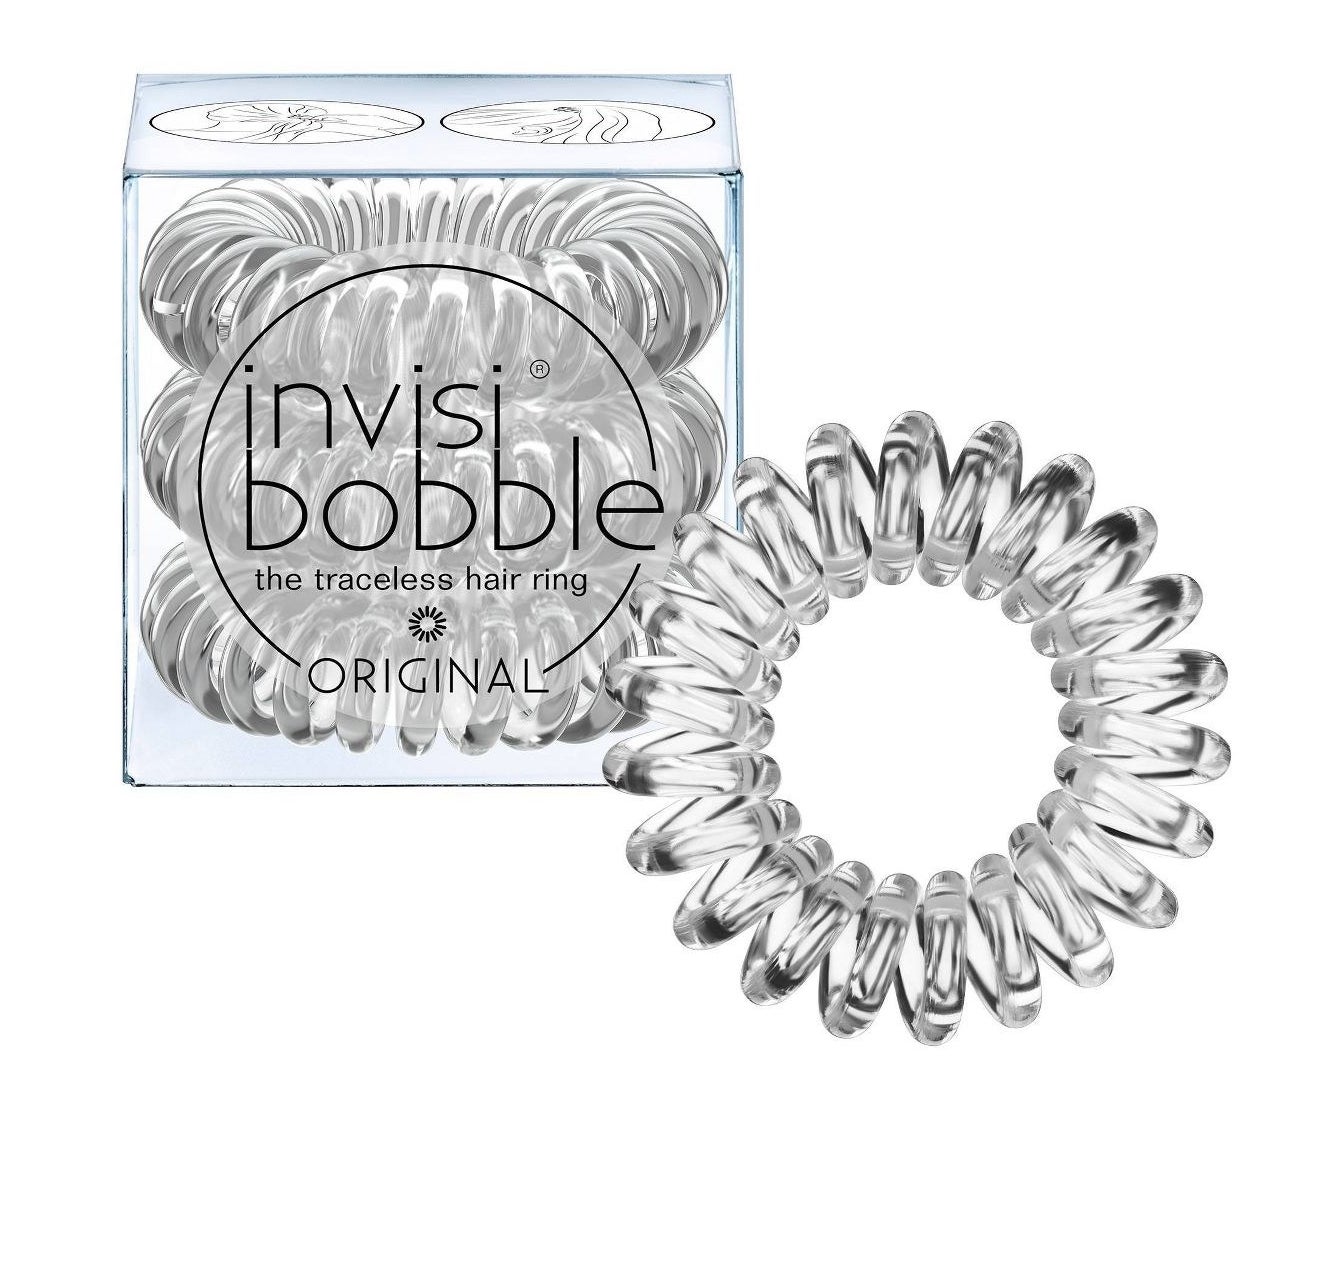 The clear spiral hair ties and their packaging